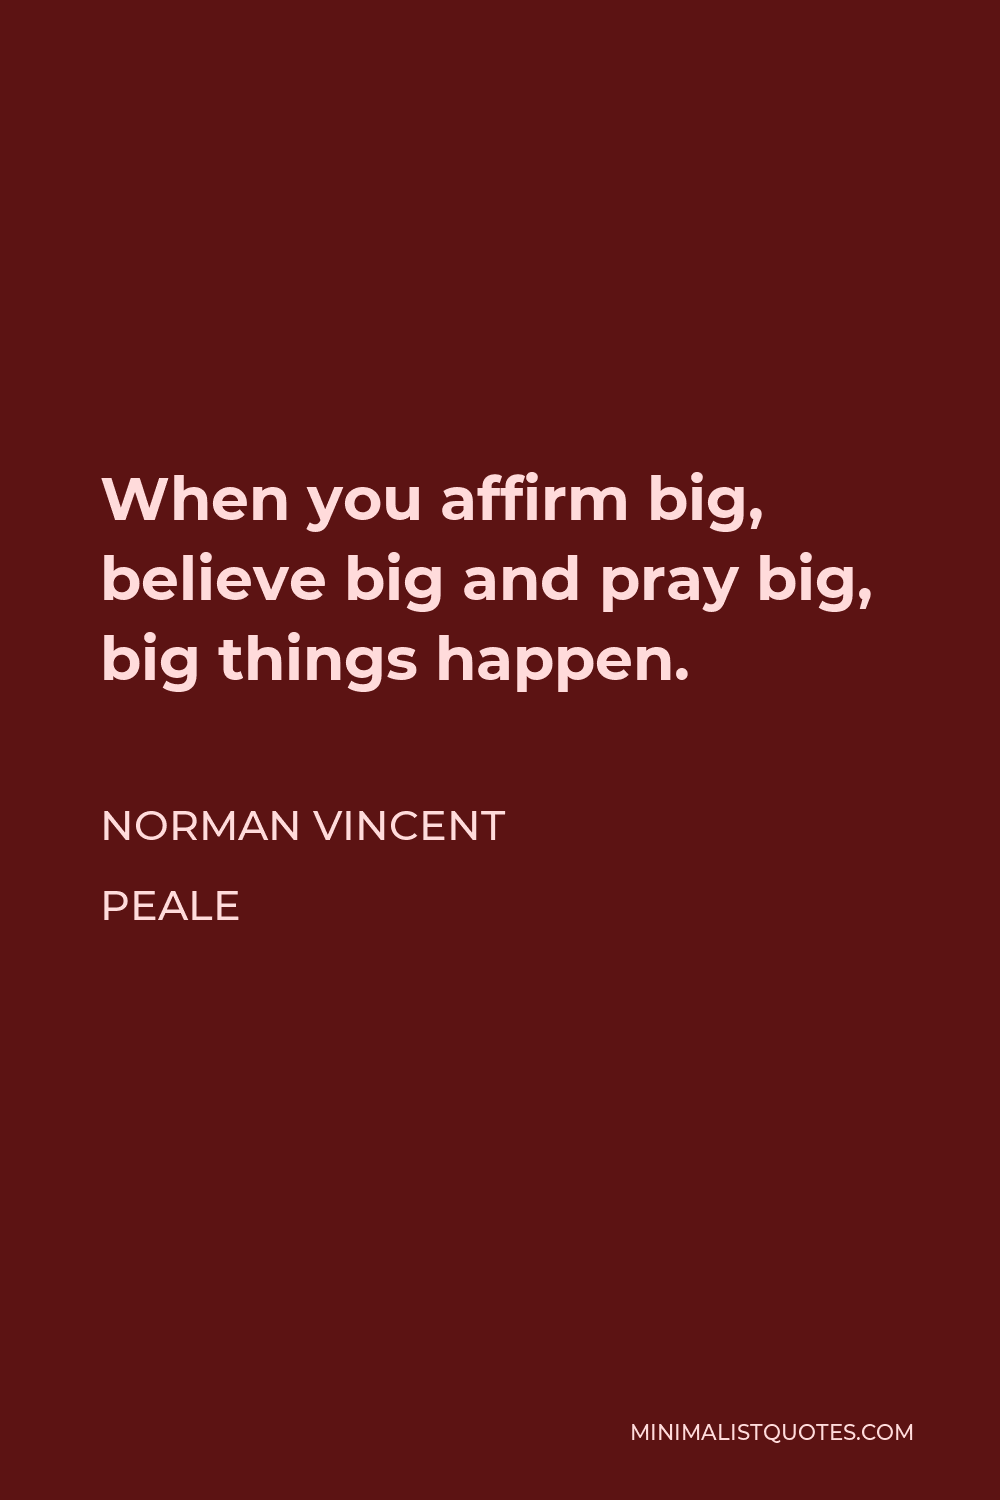 Norman Vincent Peale Quote - When you affirm big, believe big and pray big, big things happen.